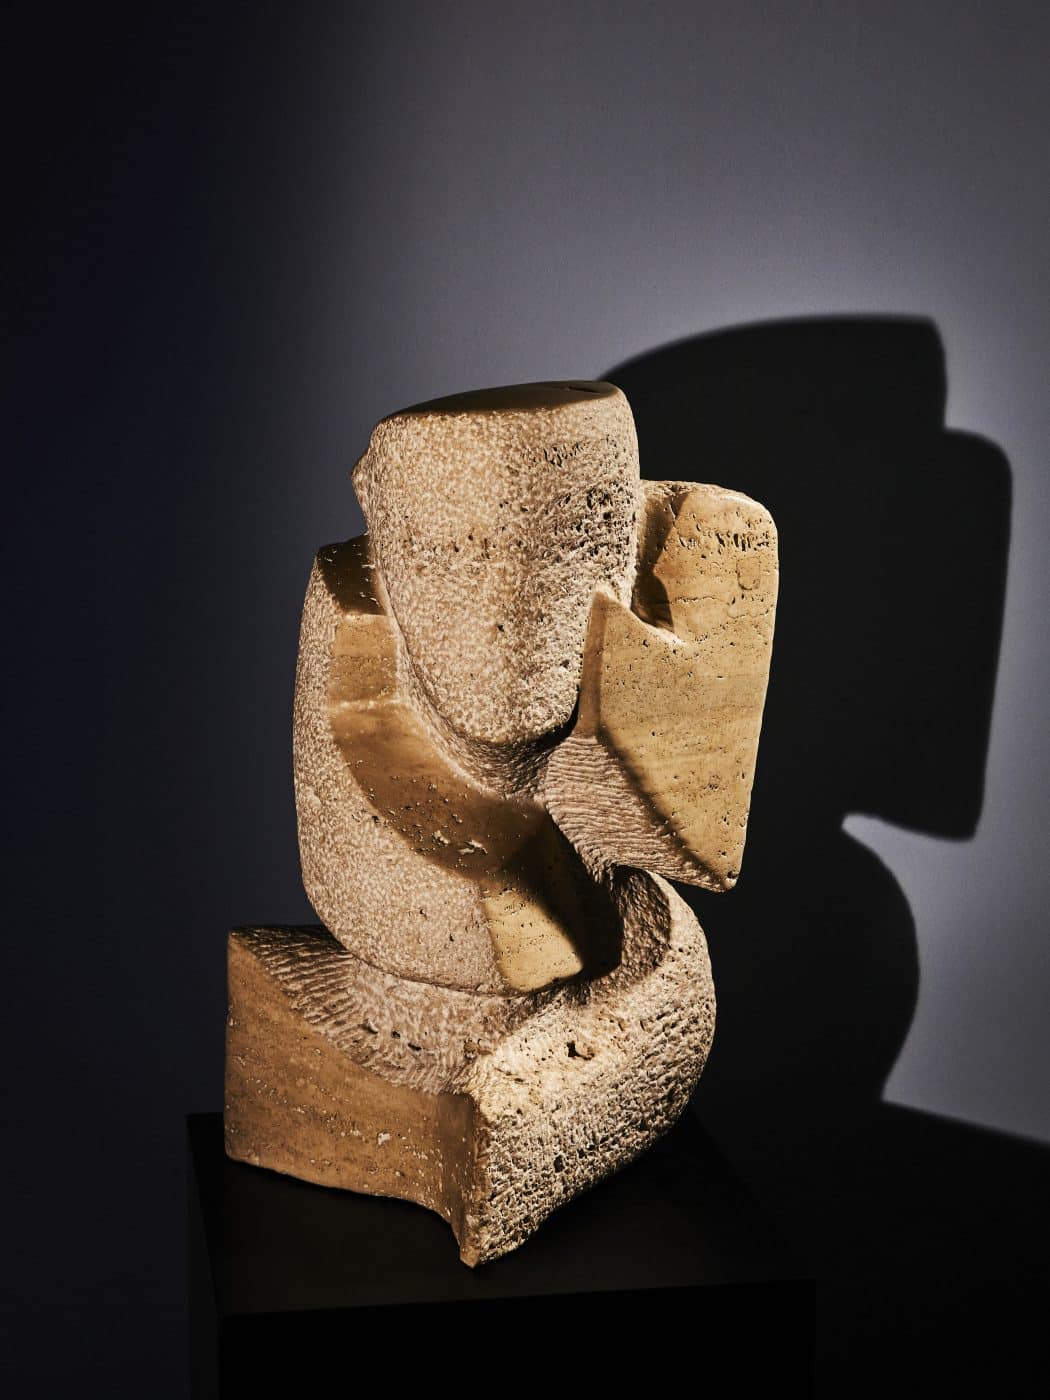 Naomi Feinberg's 1960s LIMESTONE SCULPTURE Deep in Thought was part of "A Woman Sculpting in a Man's World," Lobel Modern's 2018 exhibition of the artist's work.